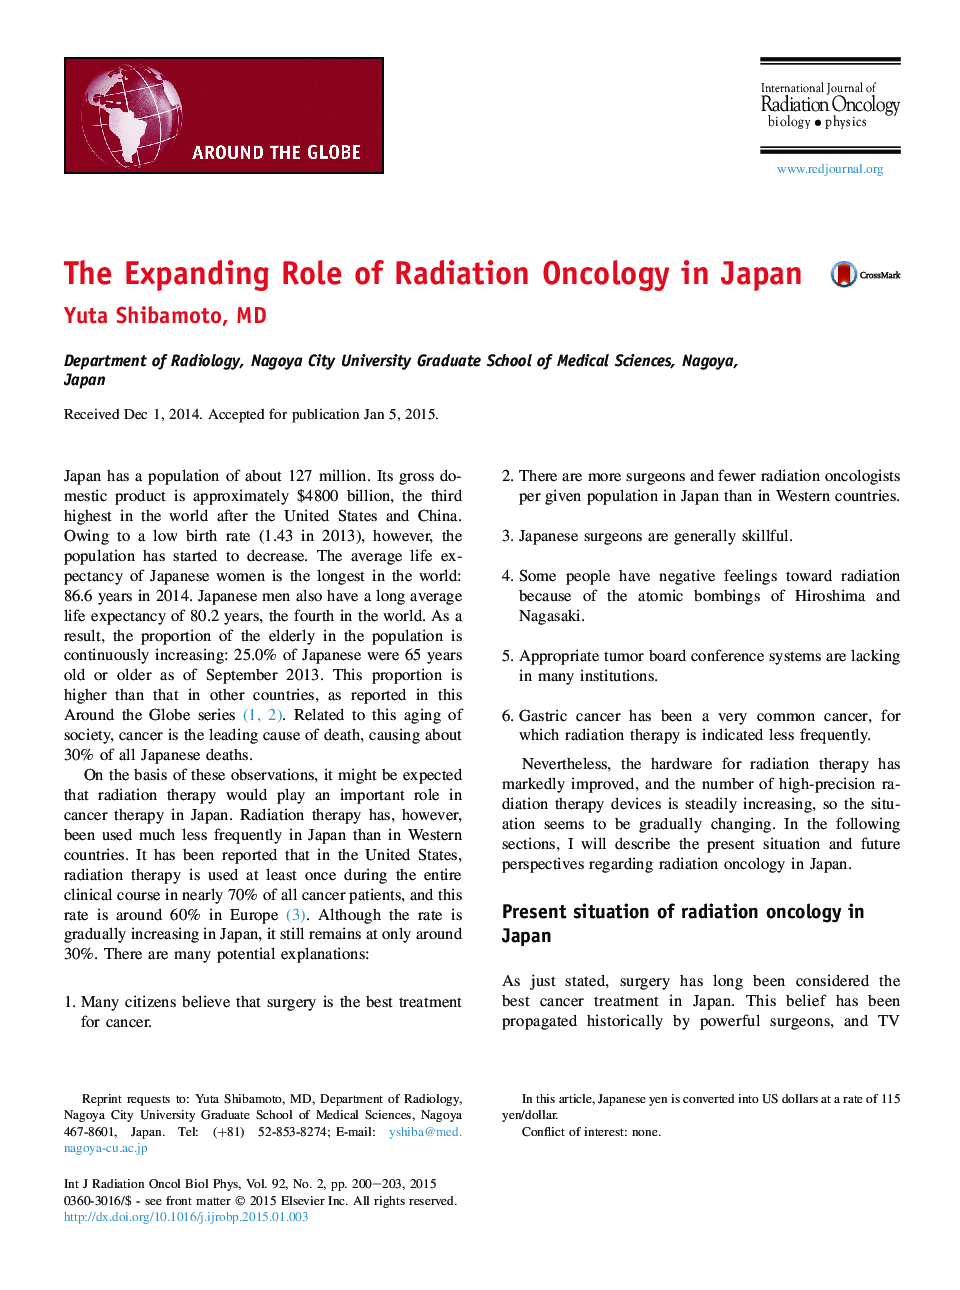 The Expanding Role of Radiation Oncology in Japan